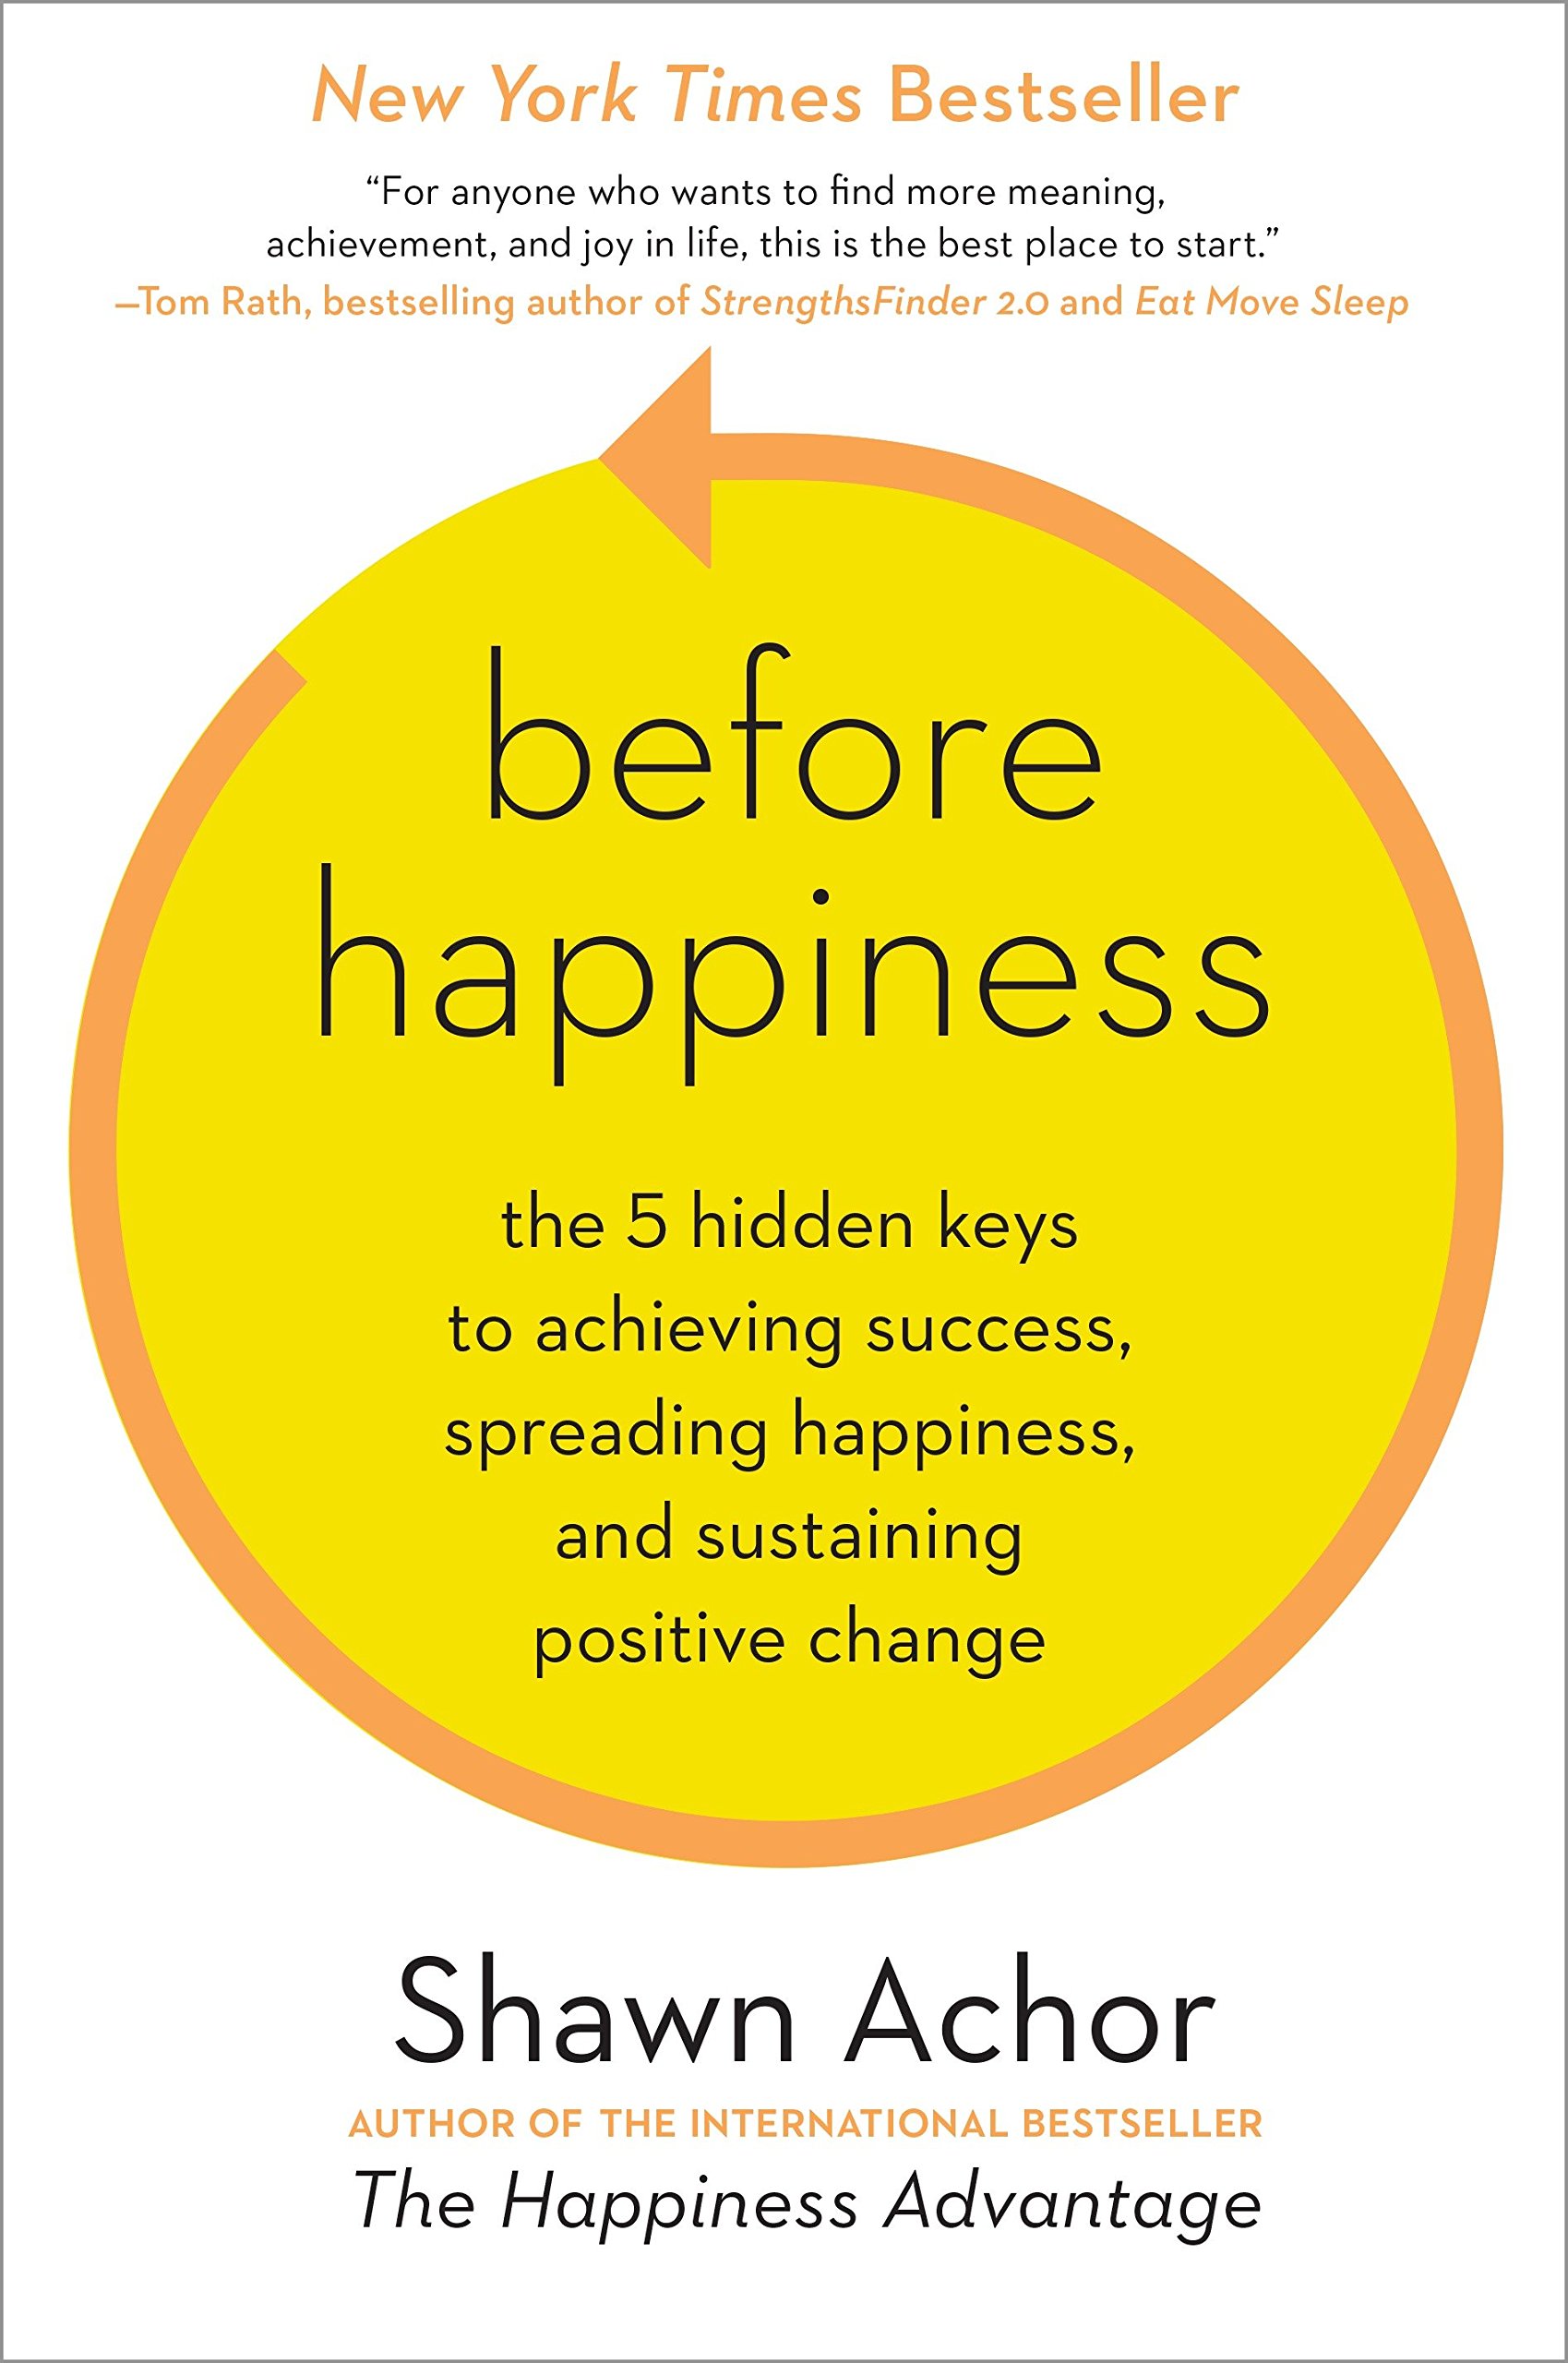 http://thehappinessedgecoaching.com/wp-content/uploads/2018/10/Before-Happiness-Shawn-Achor.jpg